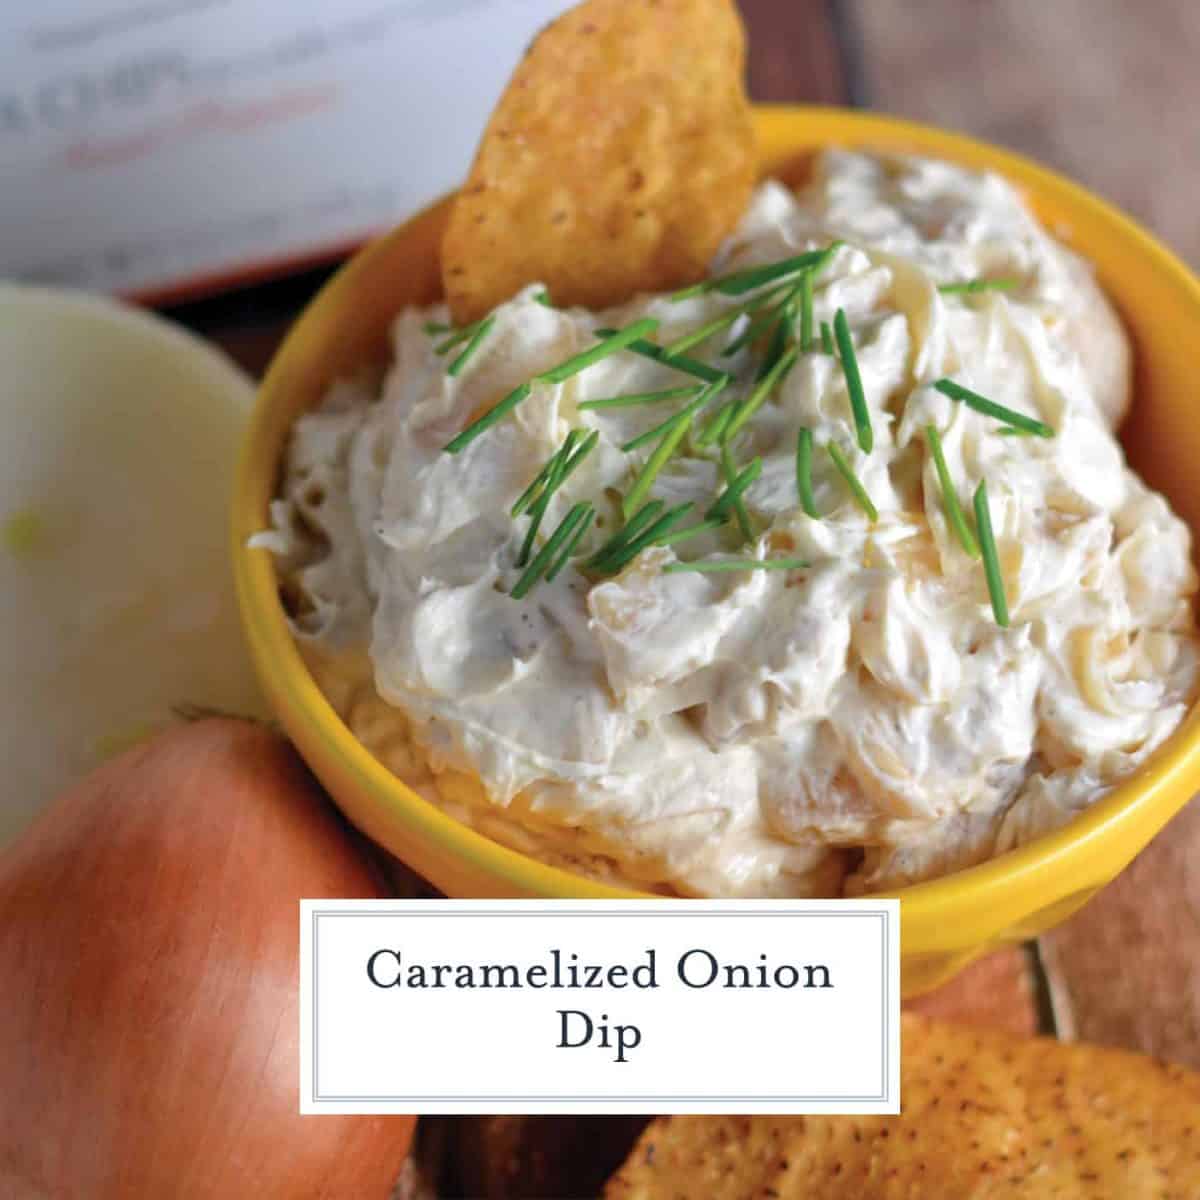 This is the best darn Caramelized Onion and Garlic Dip Recipe out there! Pair with any type of chip or vegetable for the perfect party appetizer. #diprecipes #caramelizedoniondip www.savoryexperiments.com